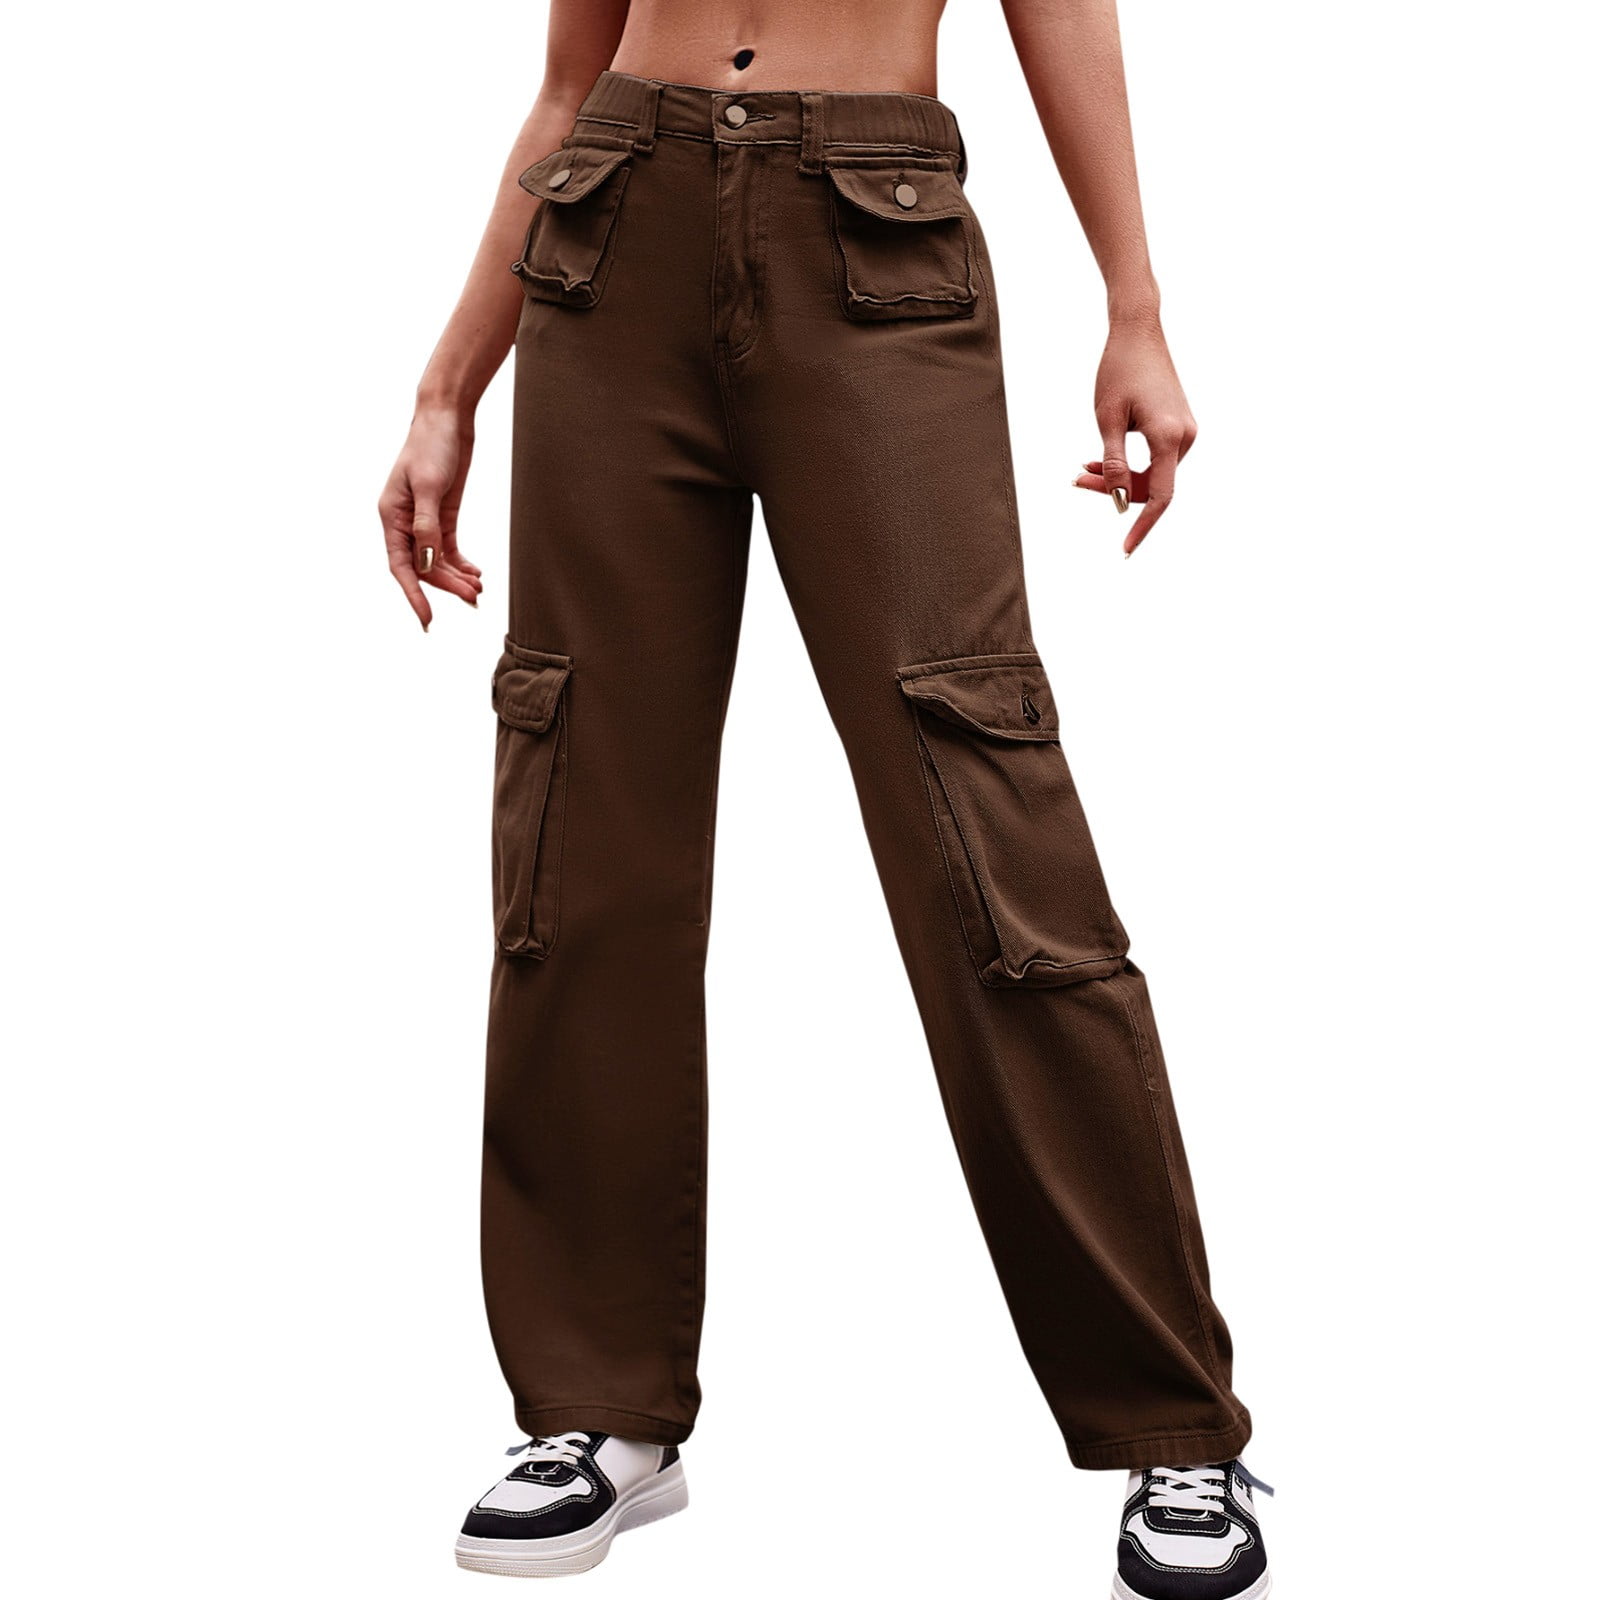 Aayomet Sweat Pants Women's Hiking Leggings Hybrid Cargo Tights Casual  Pants High Waisted Workout Travel Work Joggers,Khaki L 